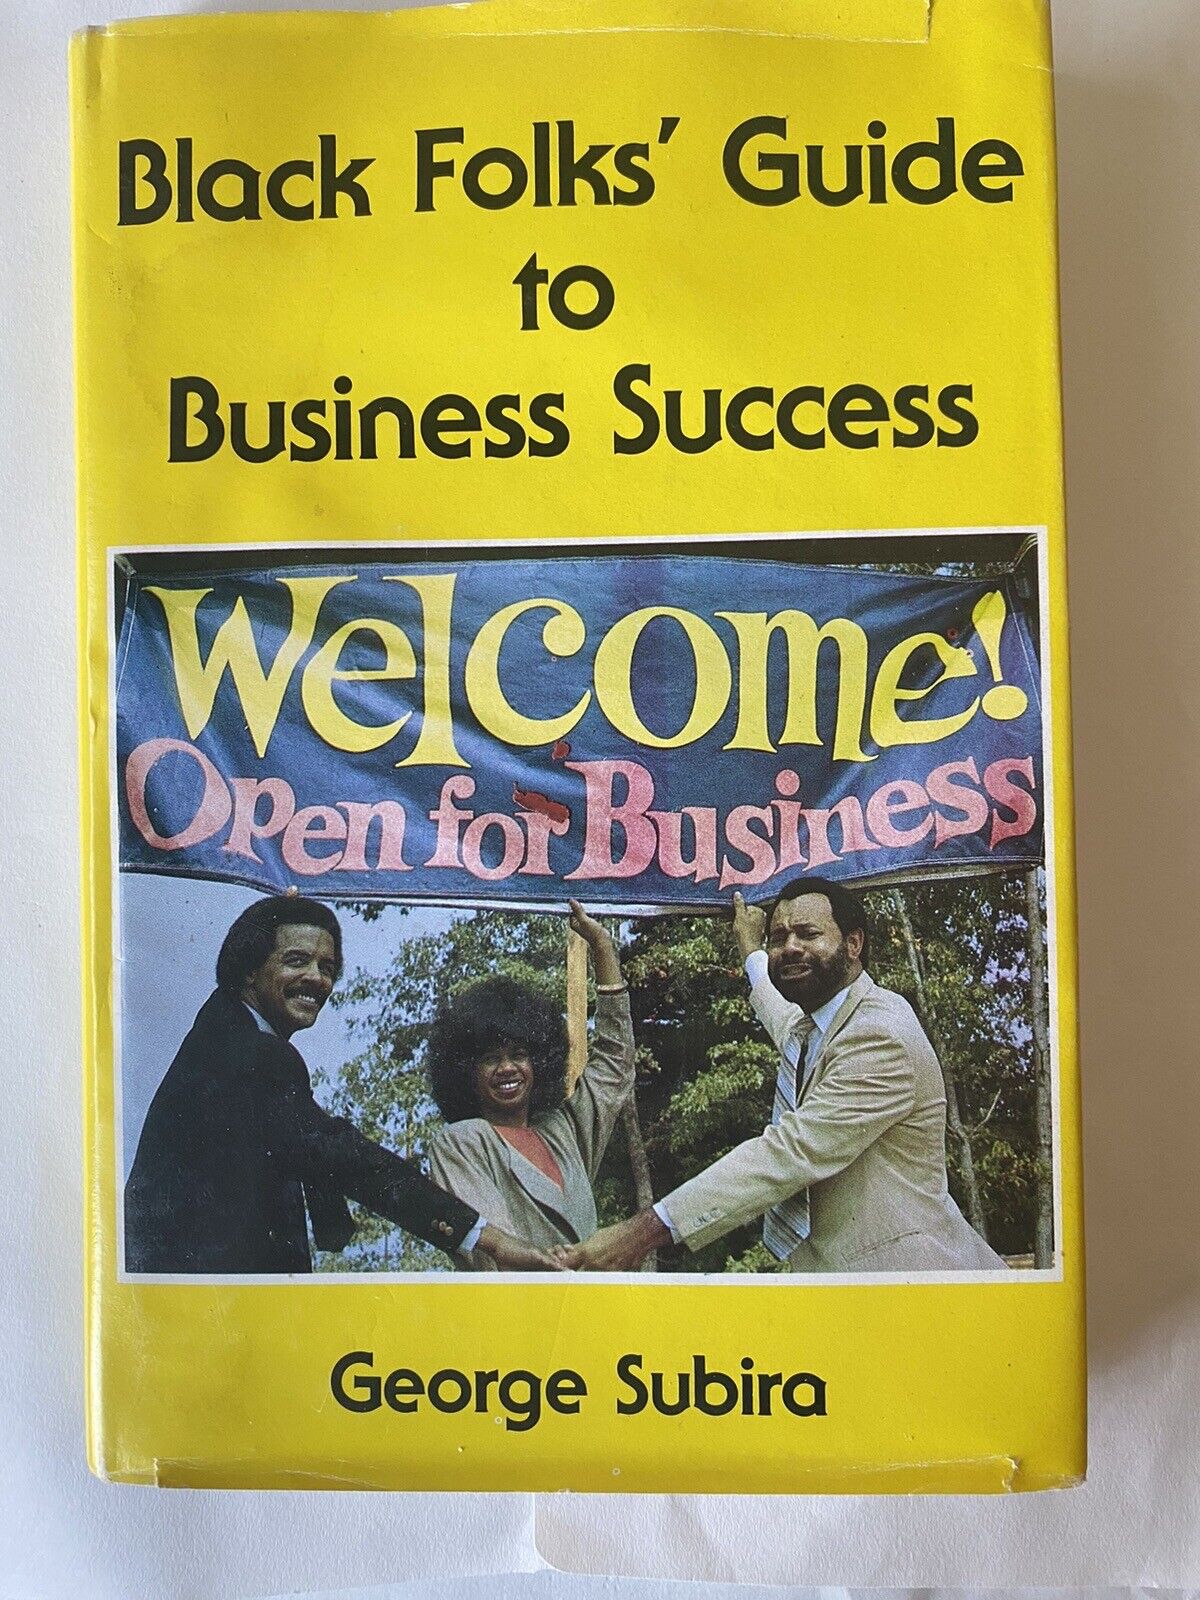 Black Folks Guide to Business Success 1st Ed, 1986 George Subira & Advertisement